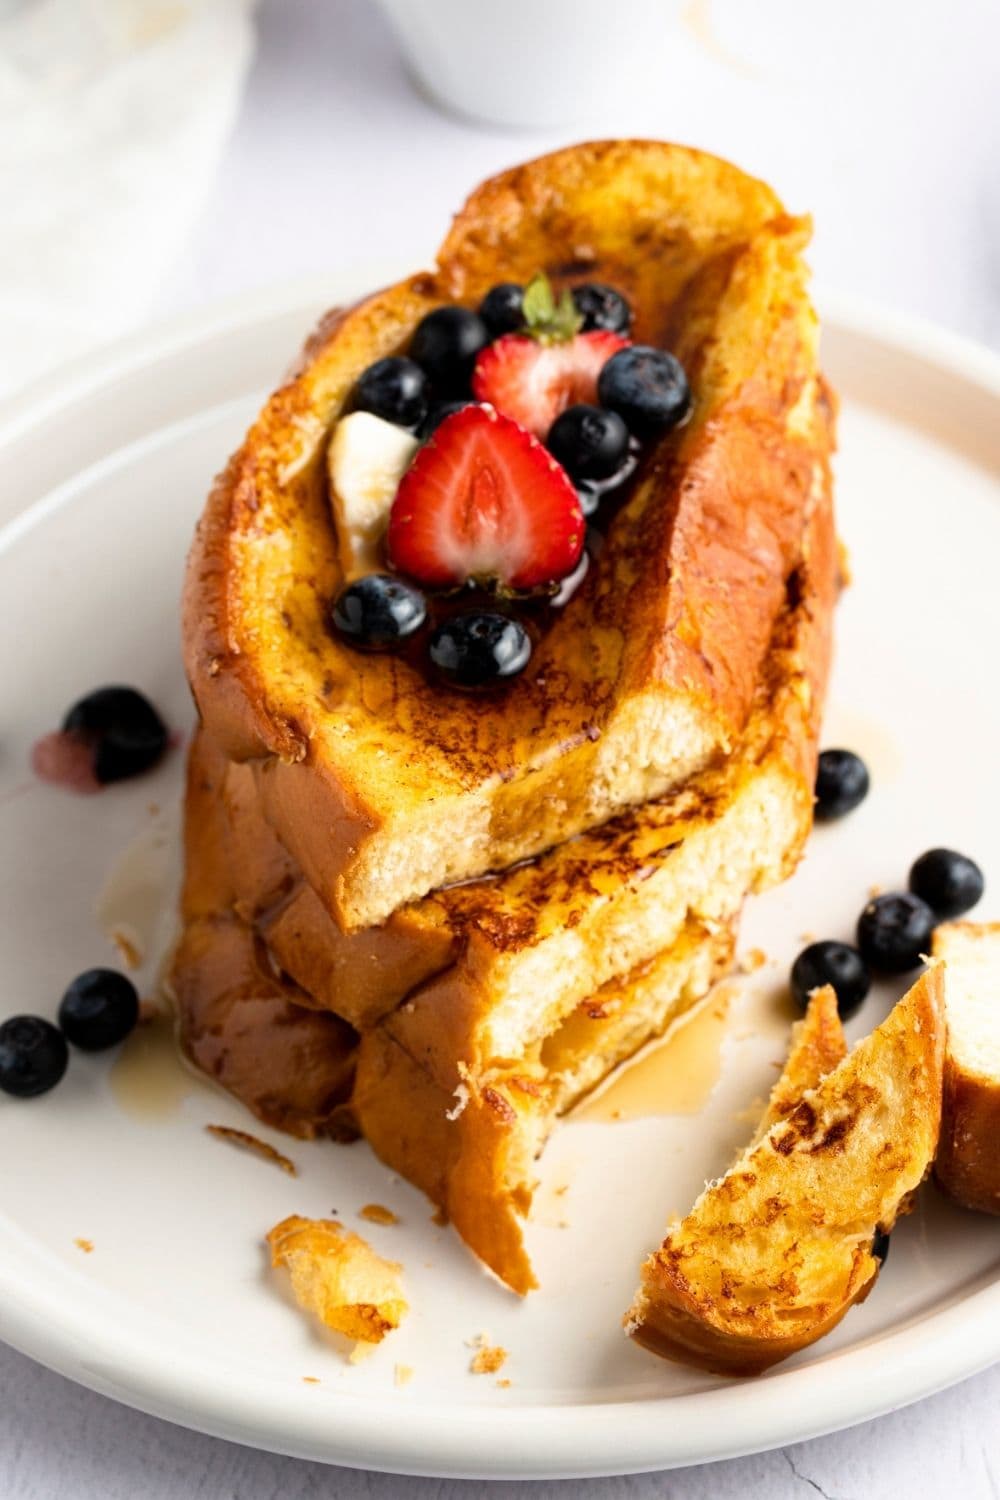 Homemade Alton Brown French Toast with Berries, Butter and Maple Syrup